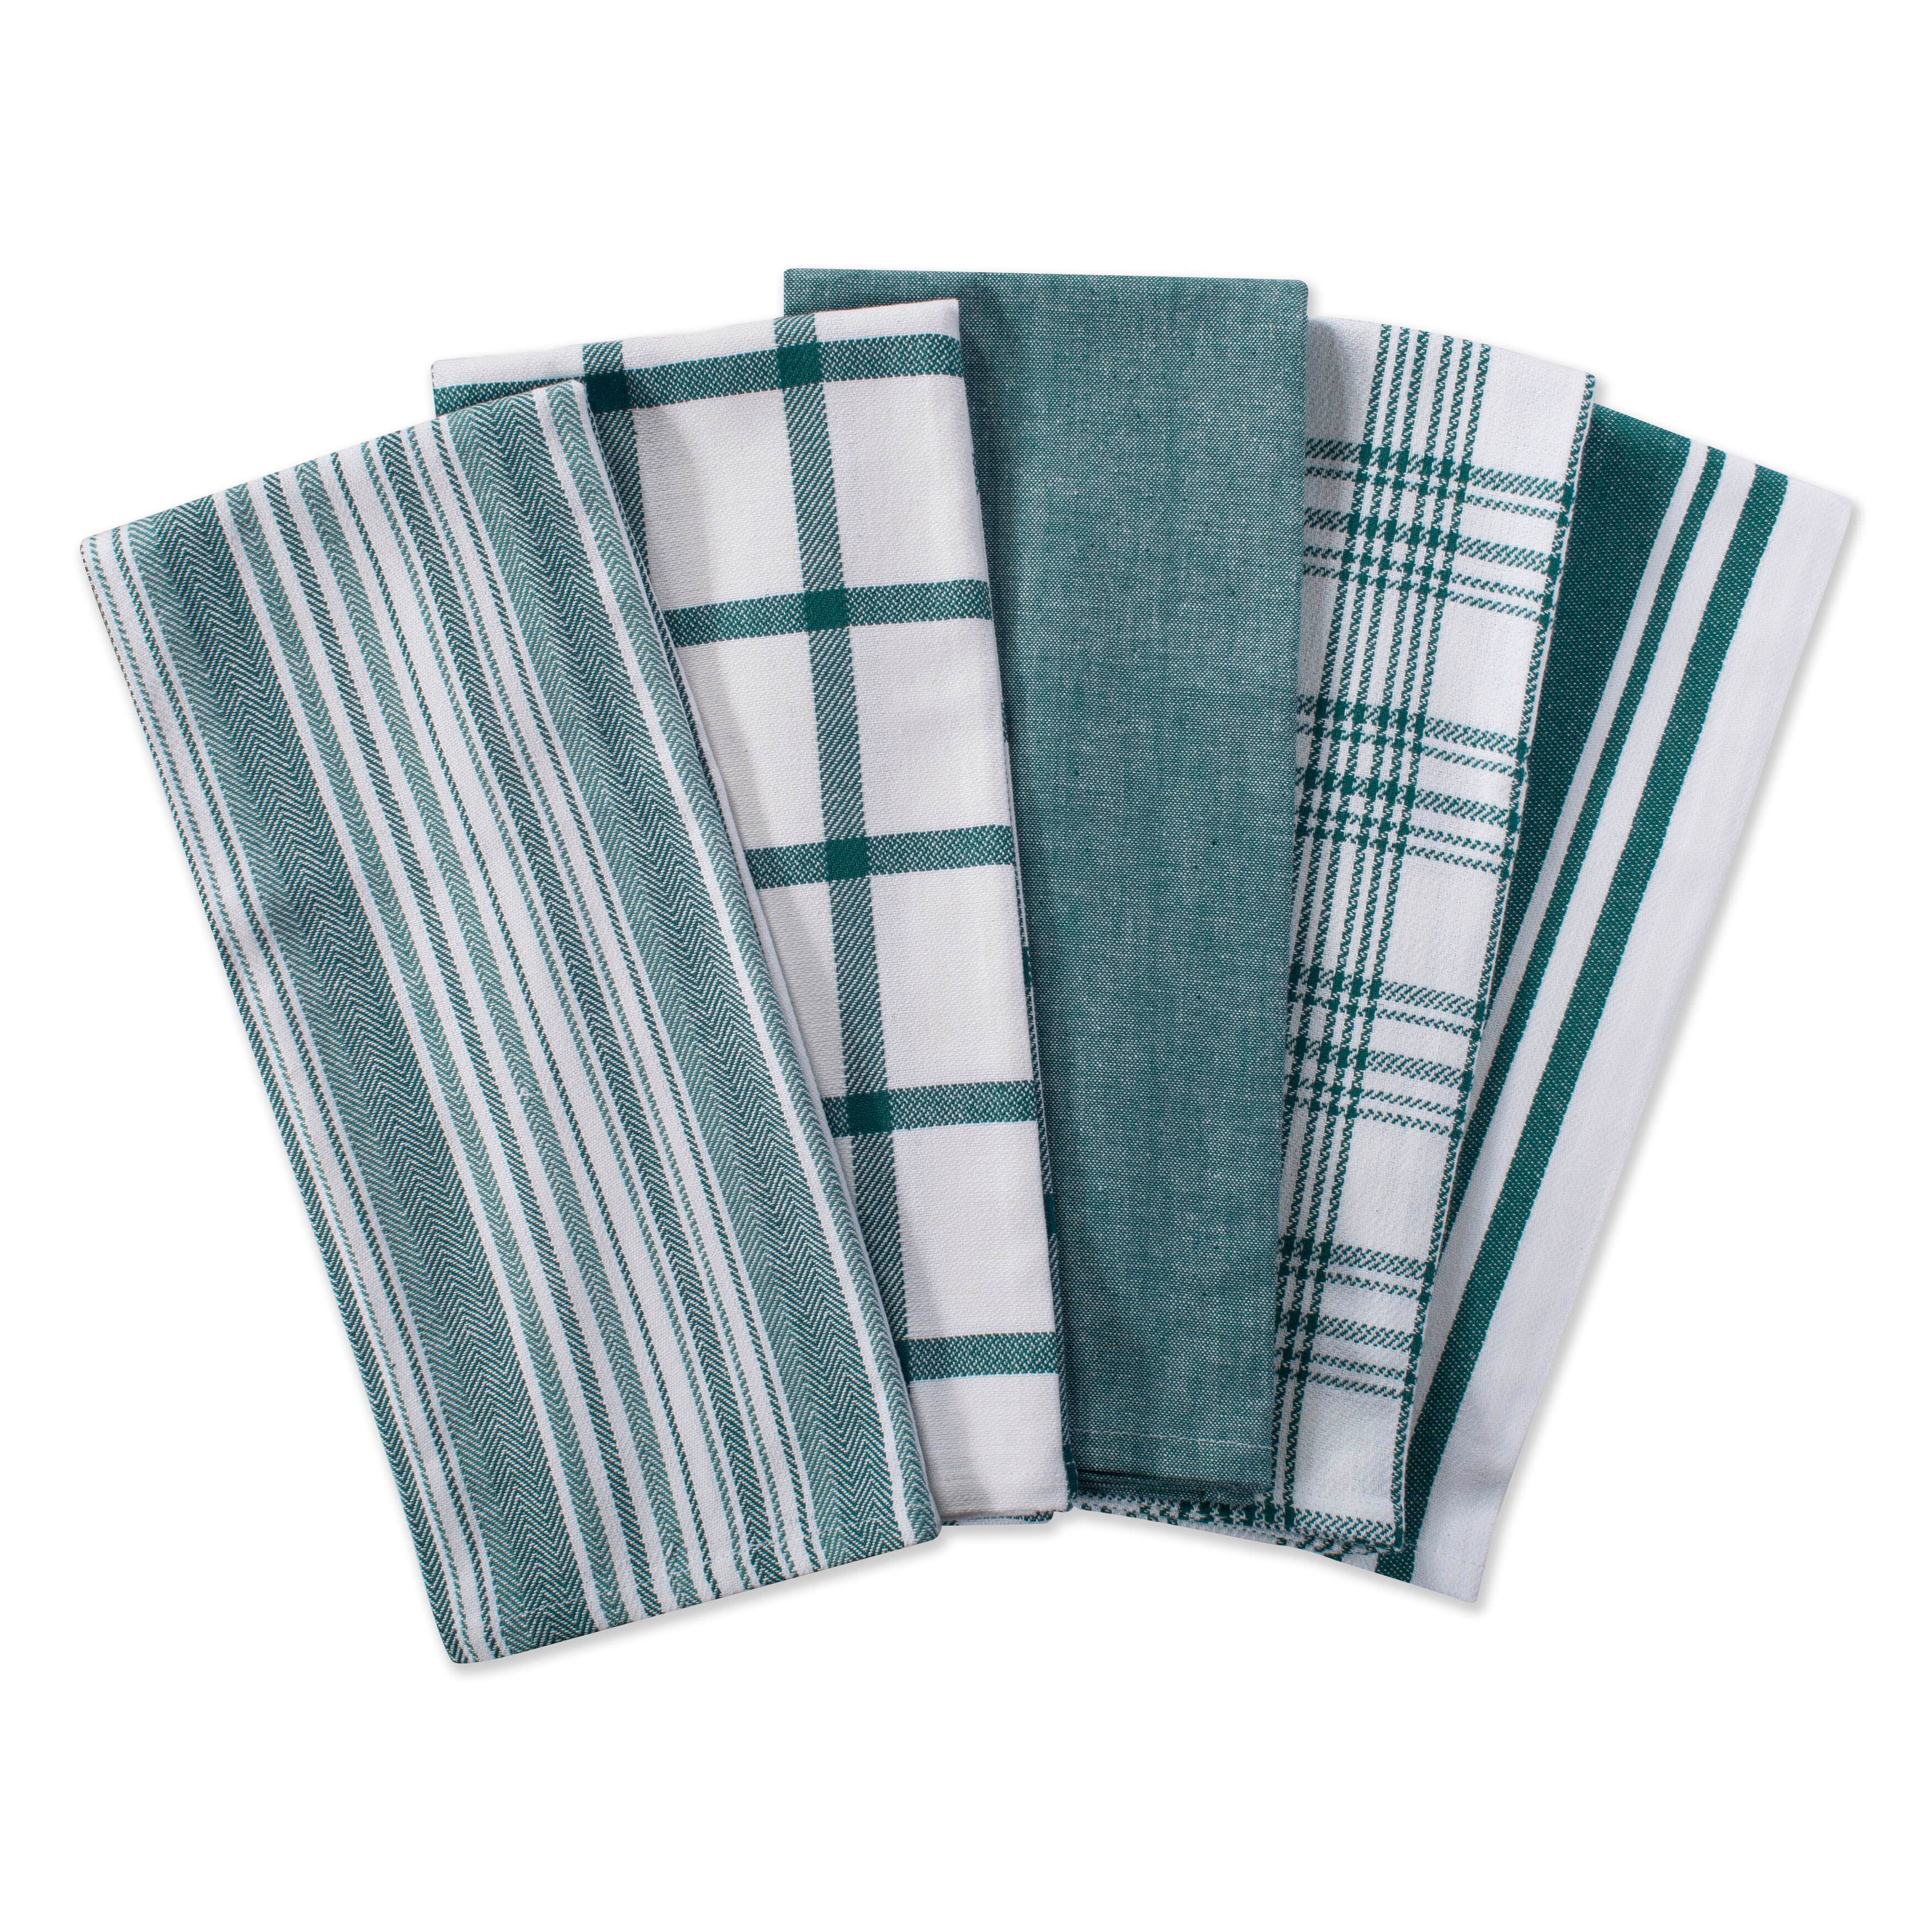 Set of 5 Teal Dish Cloths and Dish Towels 28 x 18